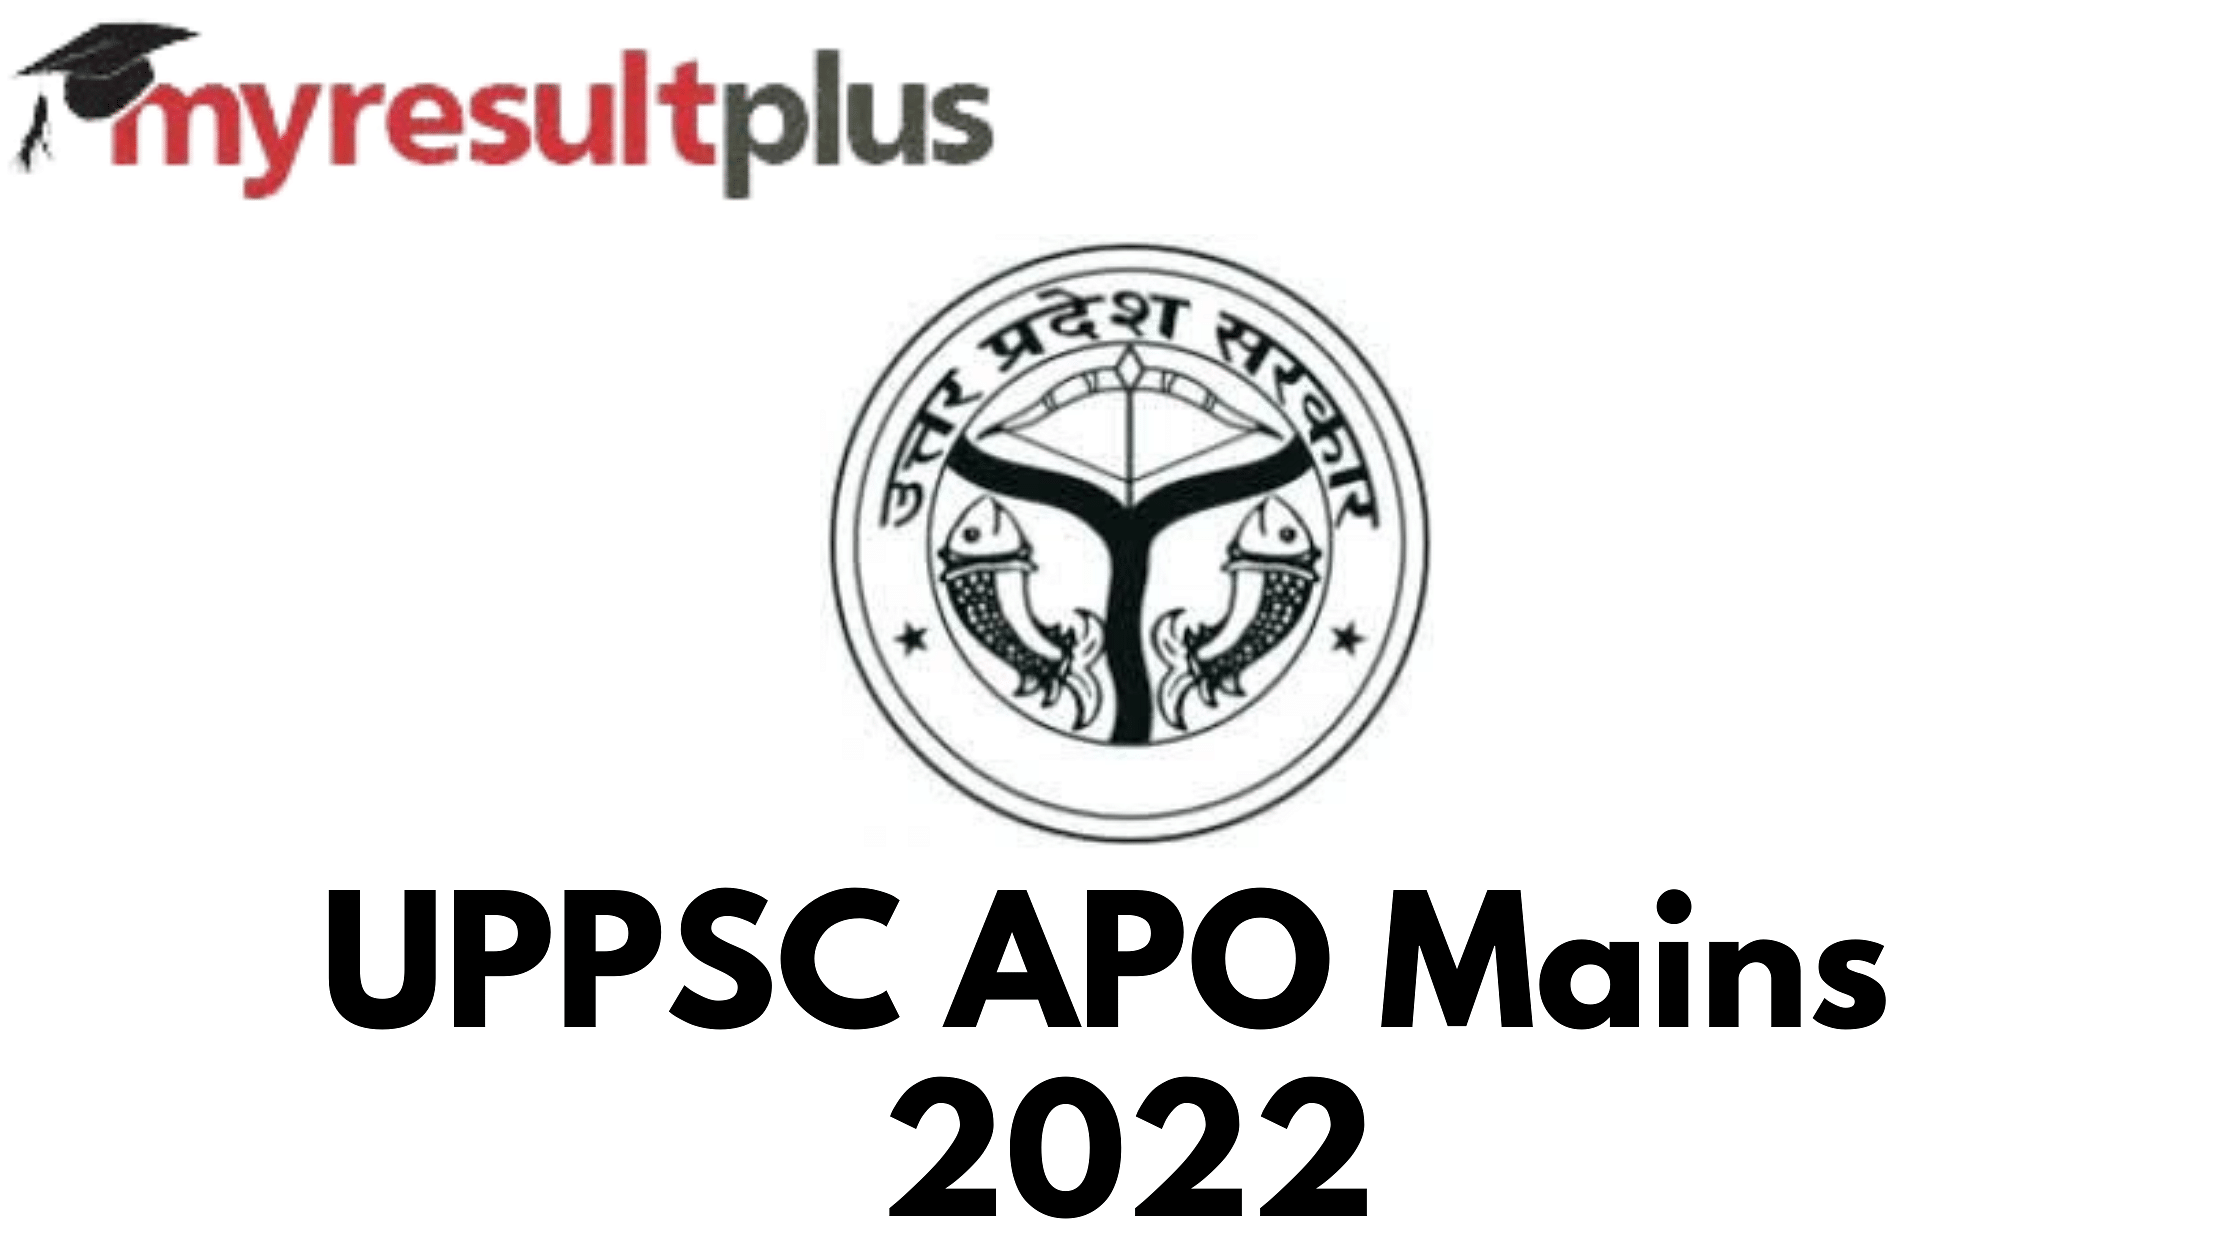 UPPSC APO Exam Date 2022 Out For Mains, Check All Details Here